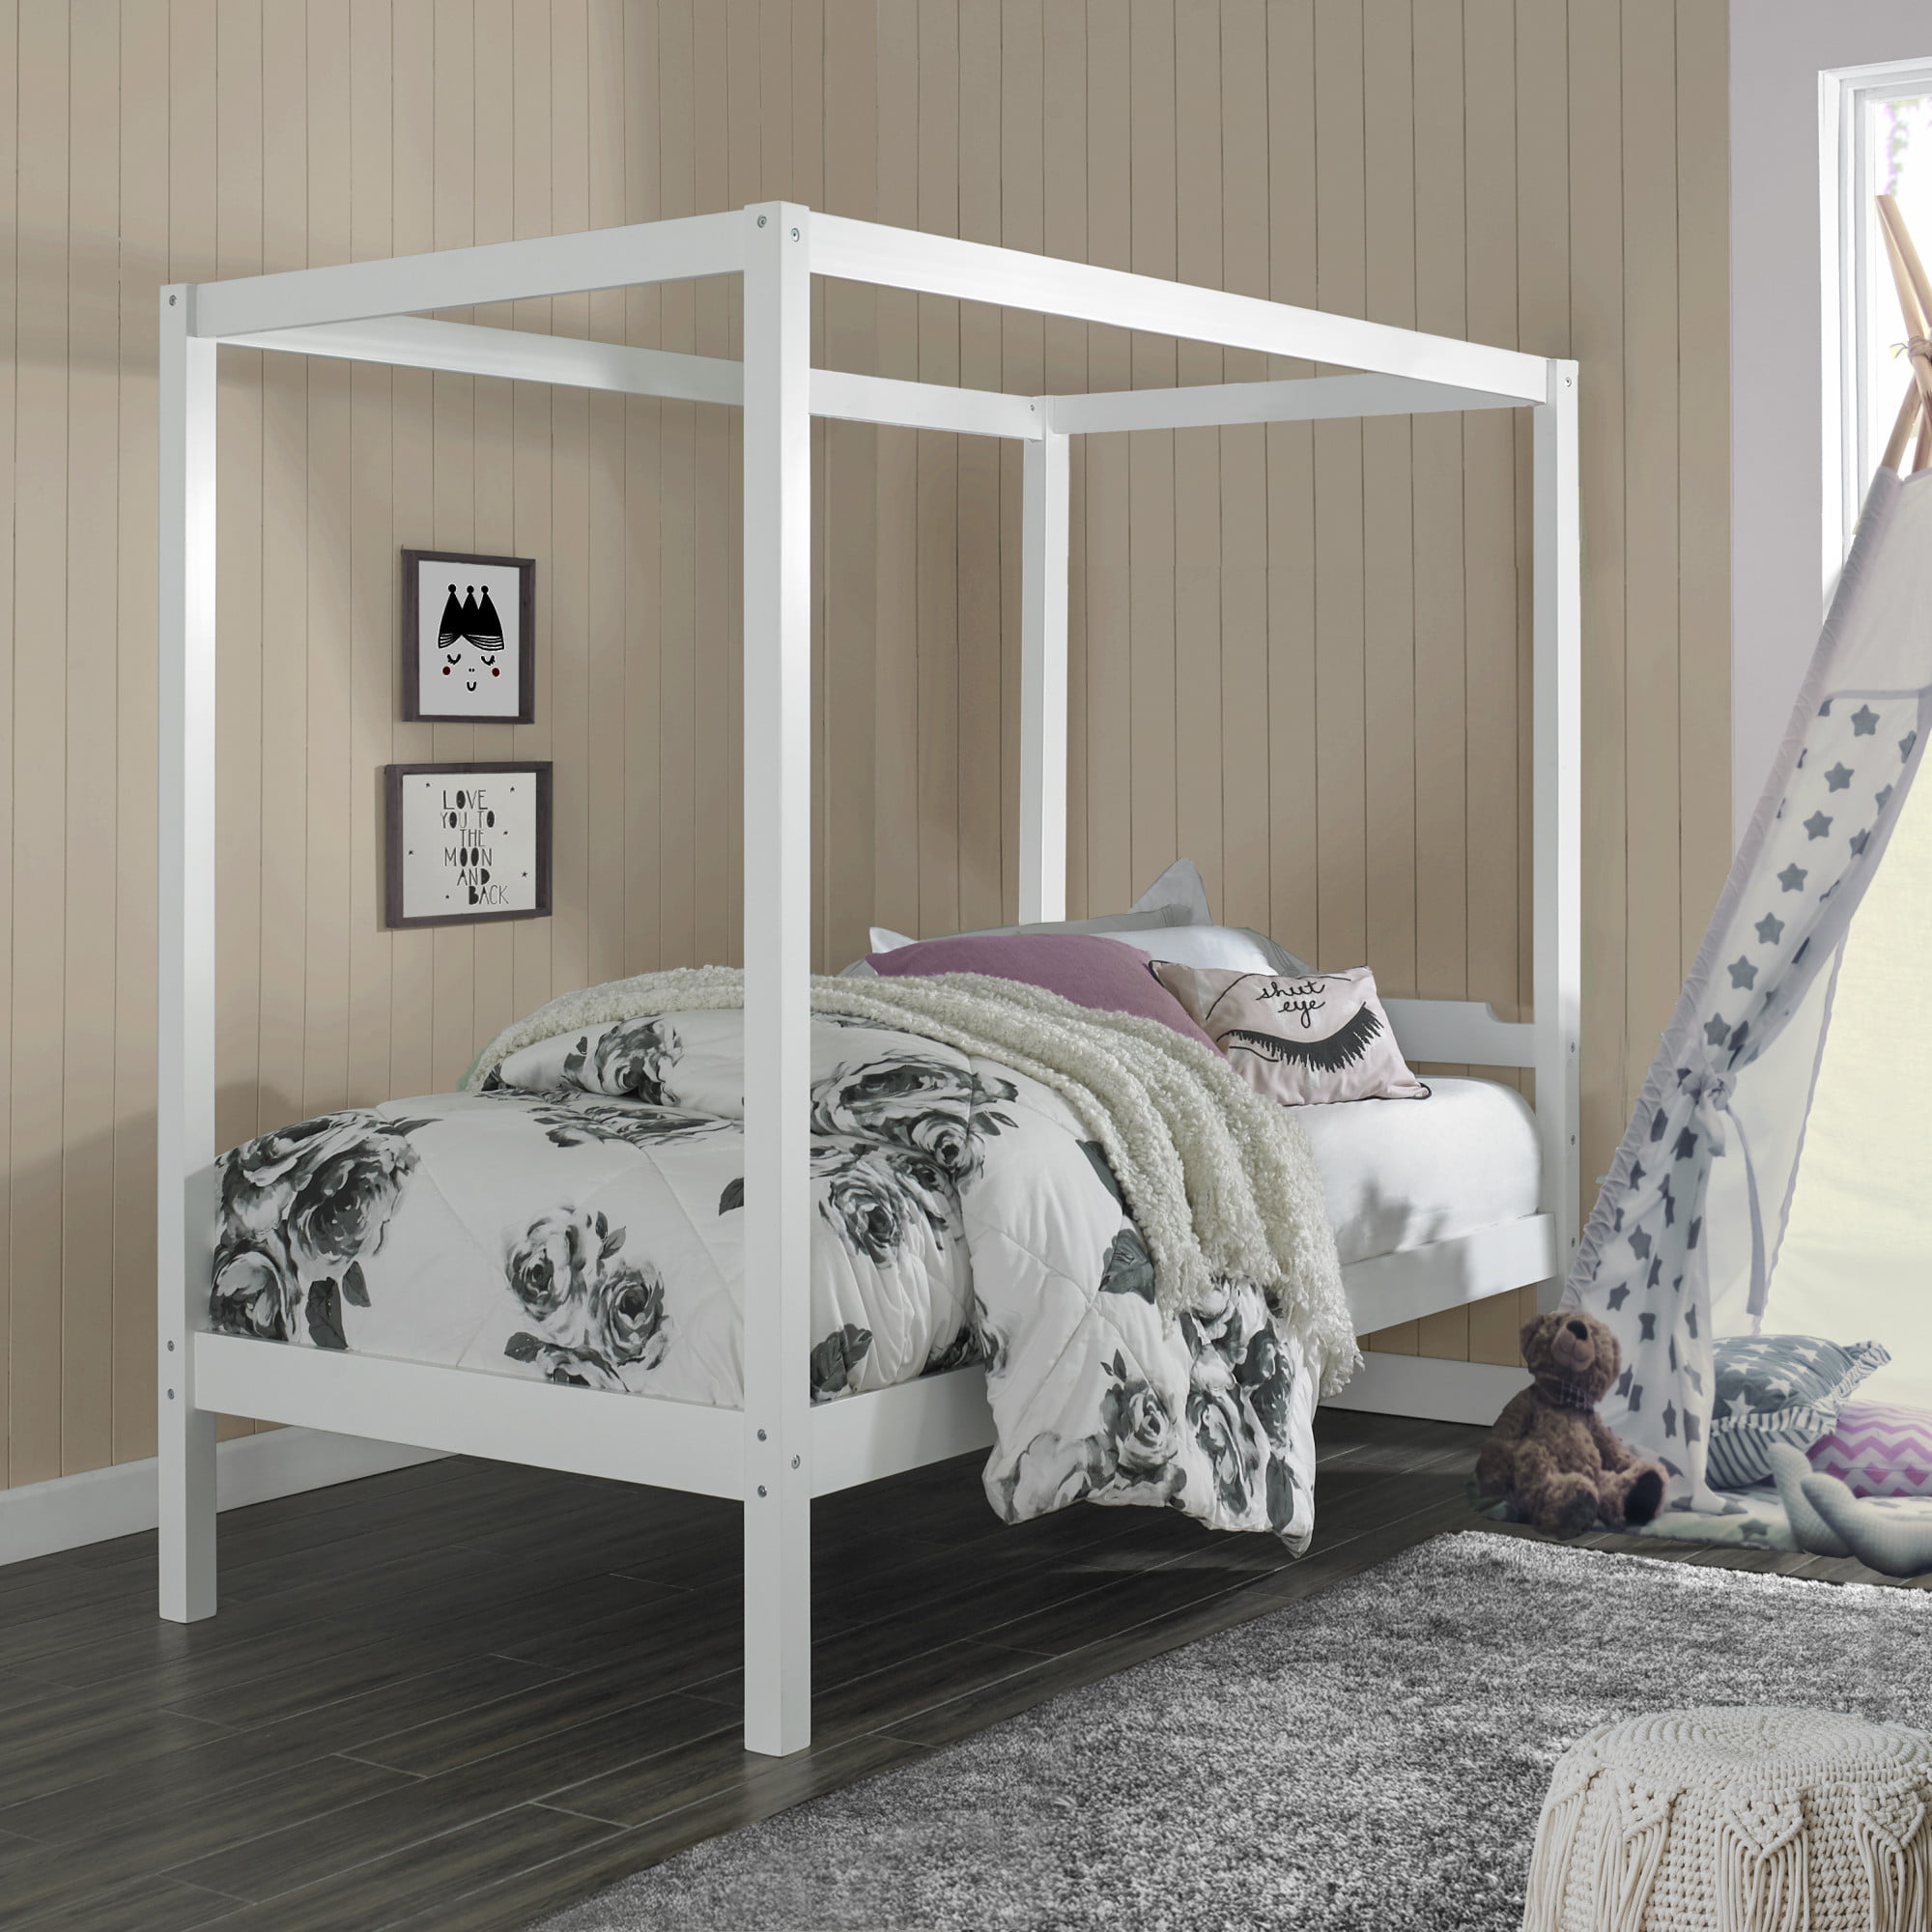 Teen Sutton Wood Canopy Twin Bed White, Kids Canopy Bed Frame